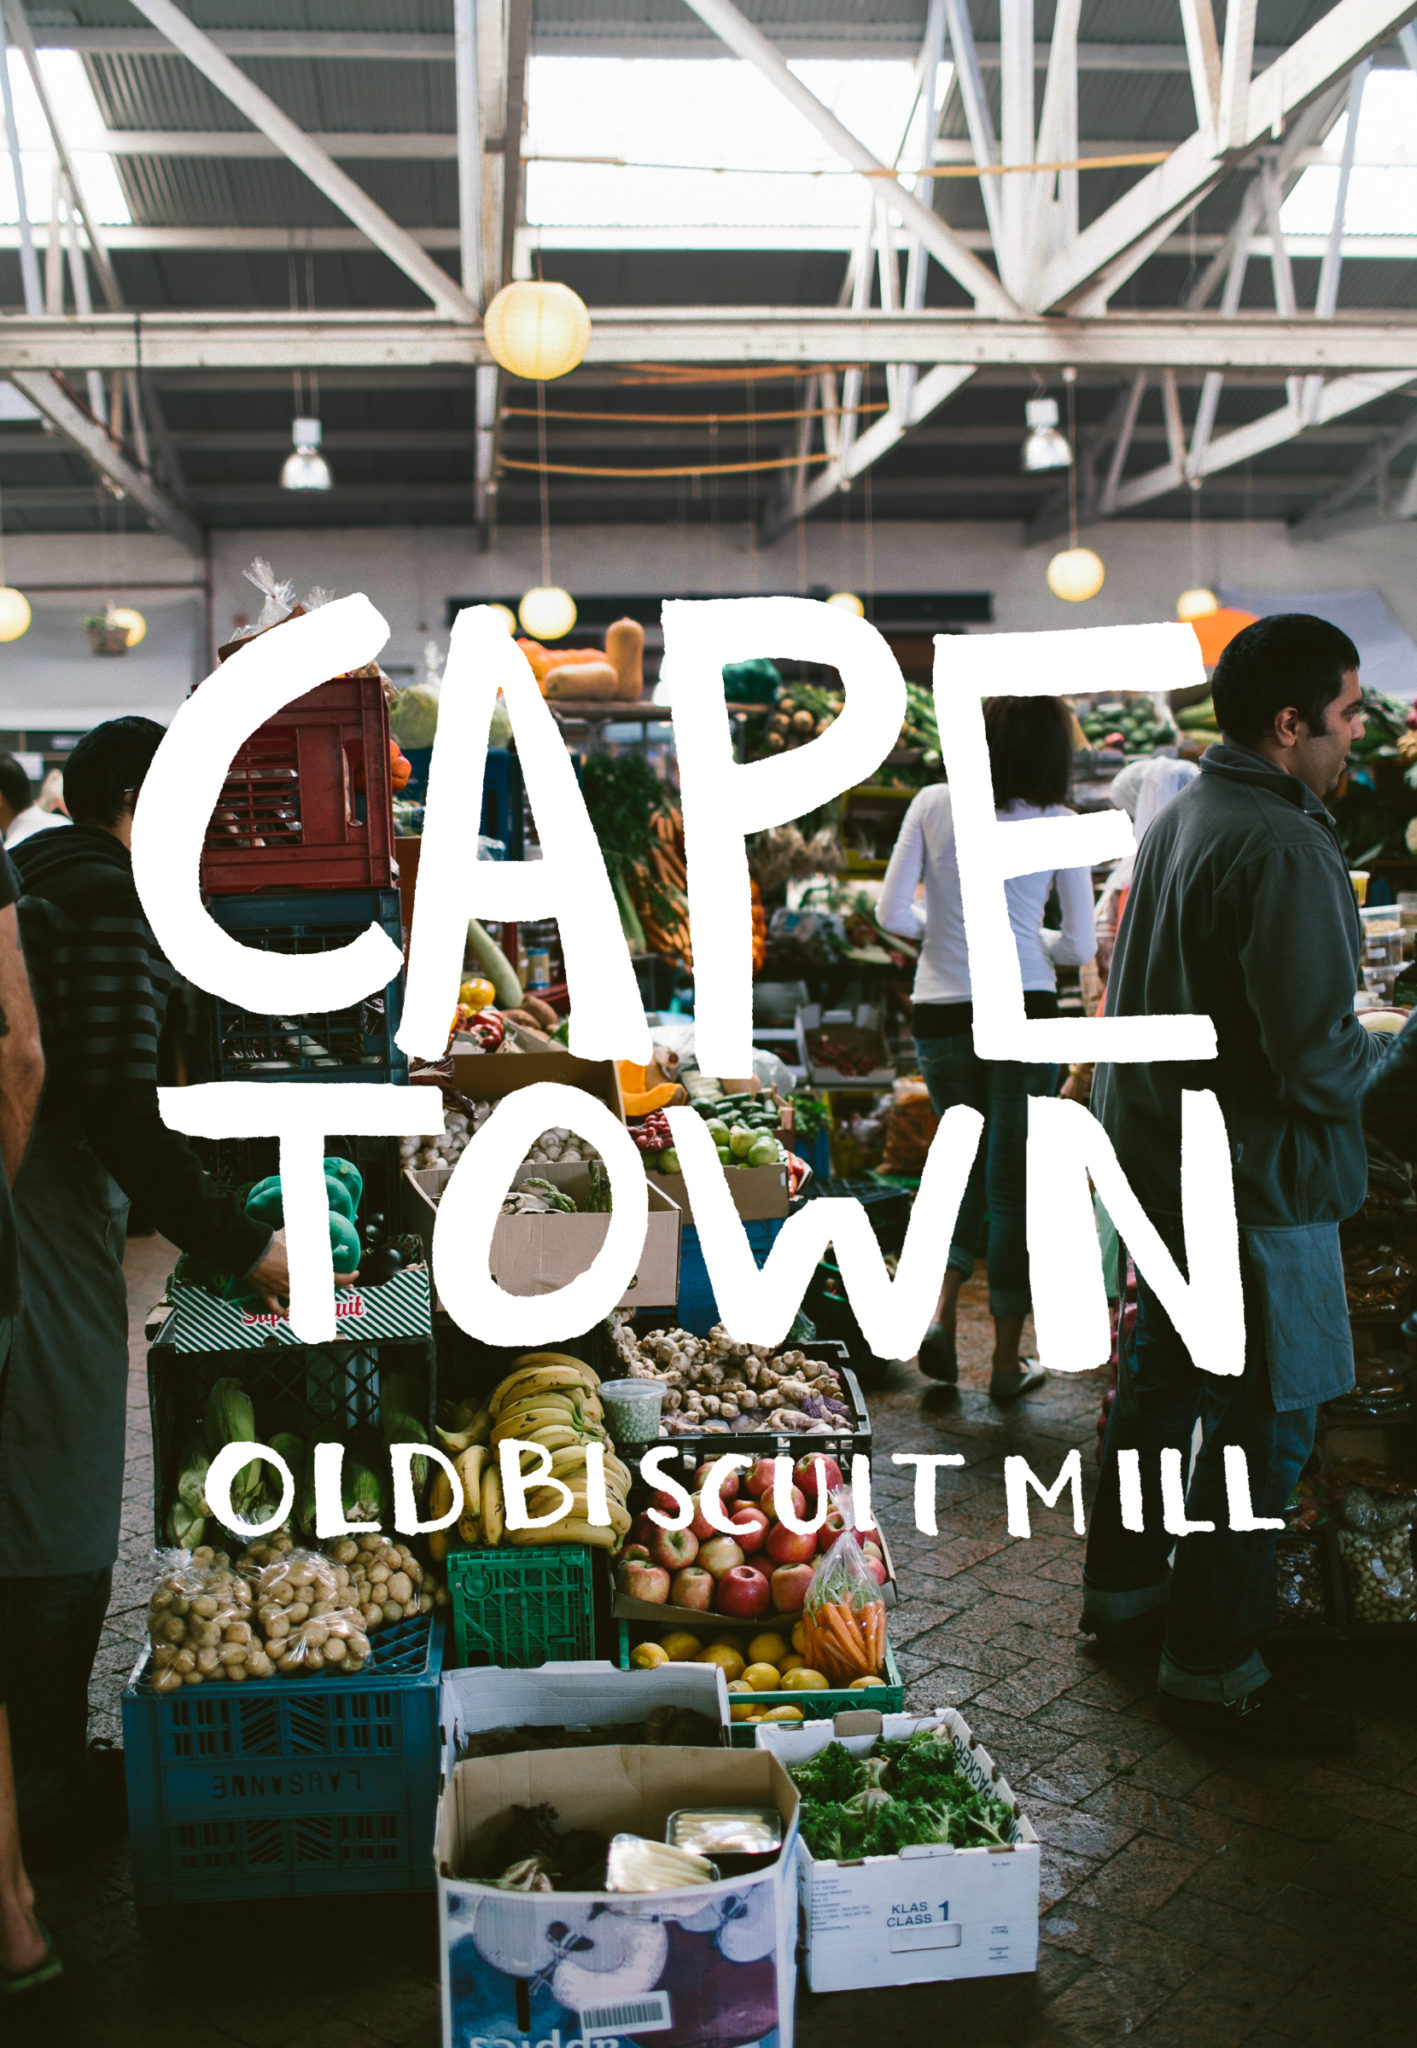 Cape Town: Old Biscuit Mill